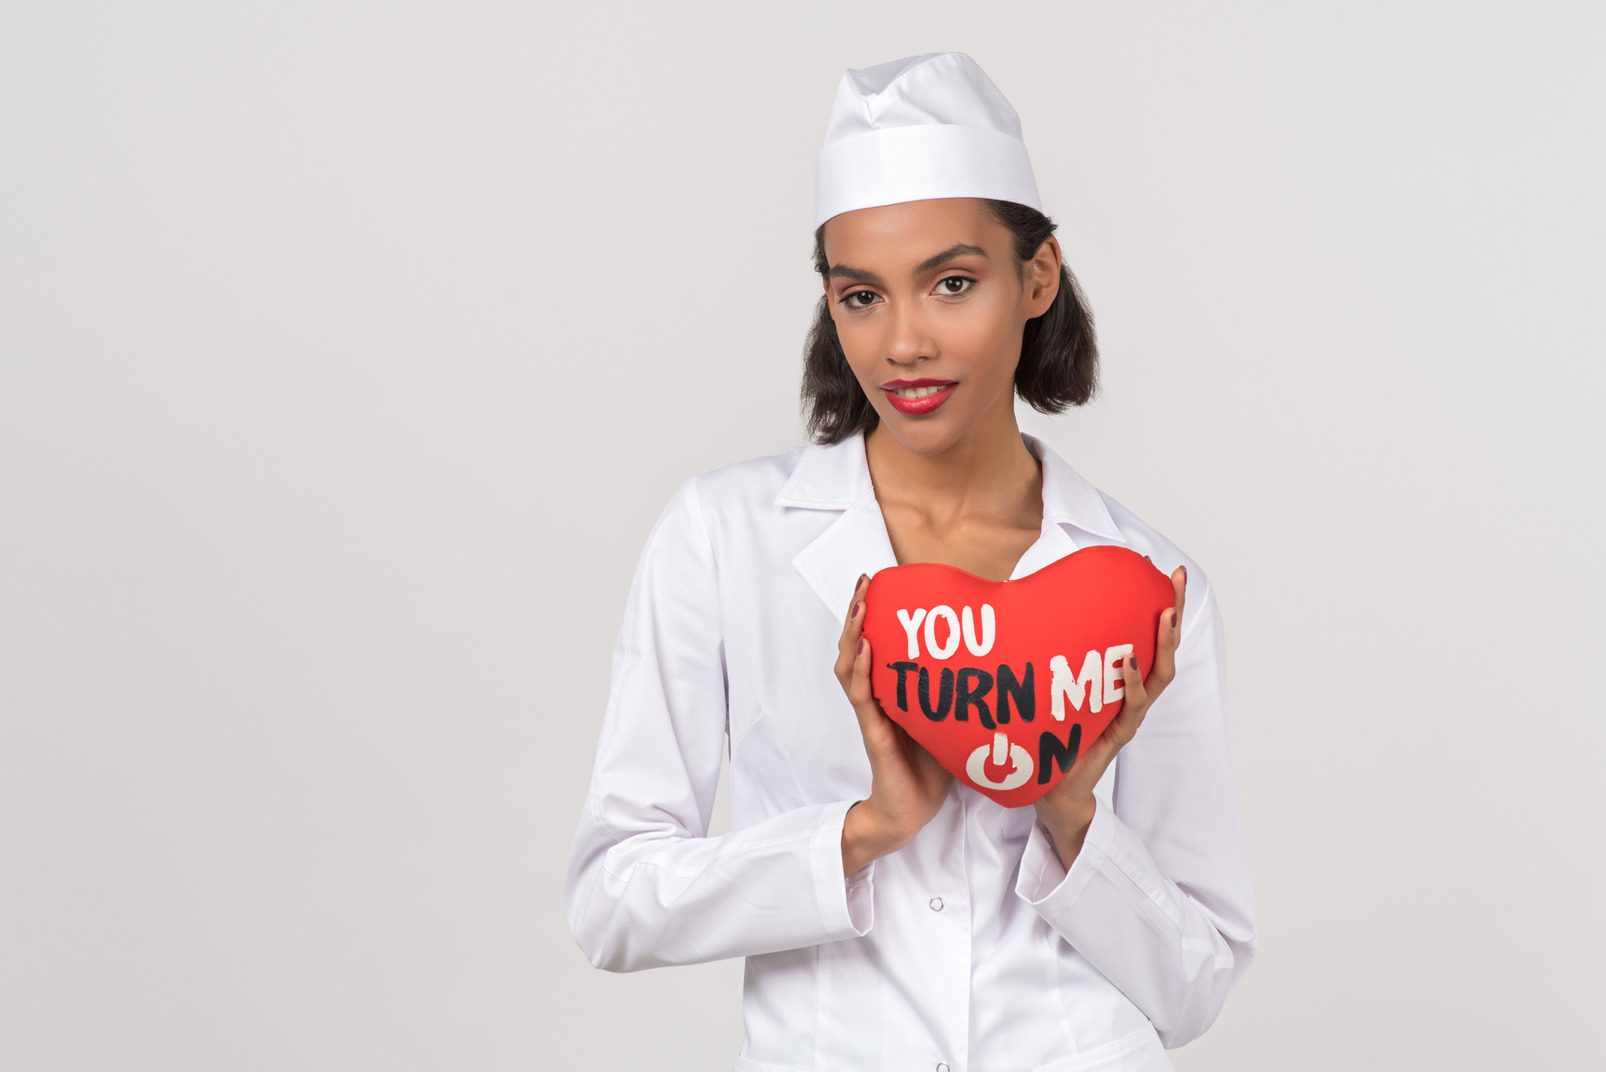 Attractive young female doctor holding a toy heart